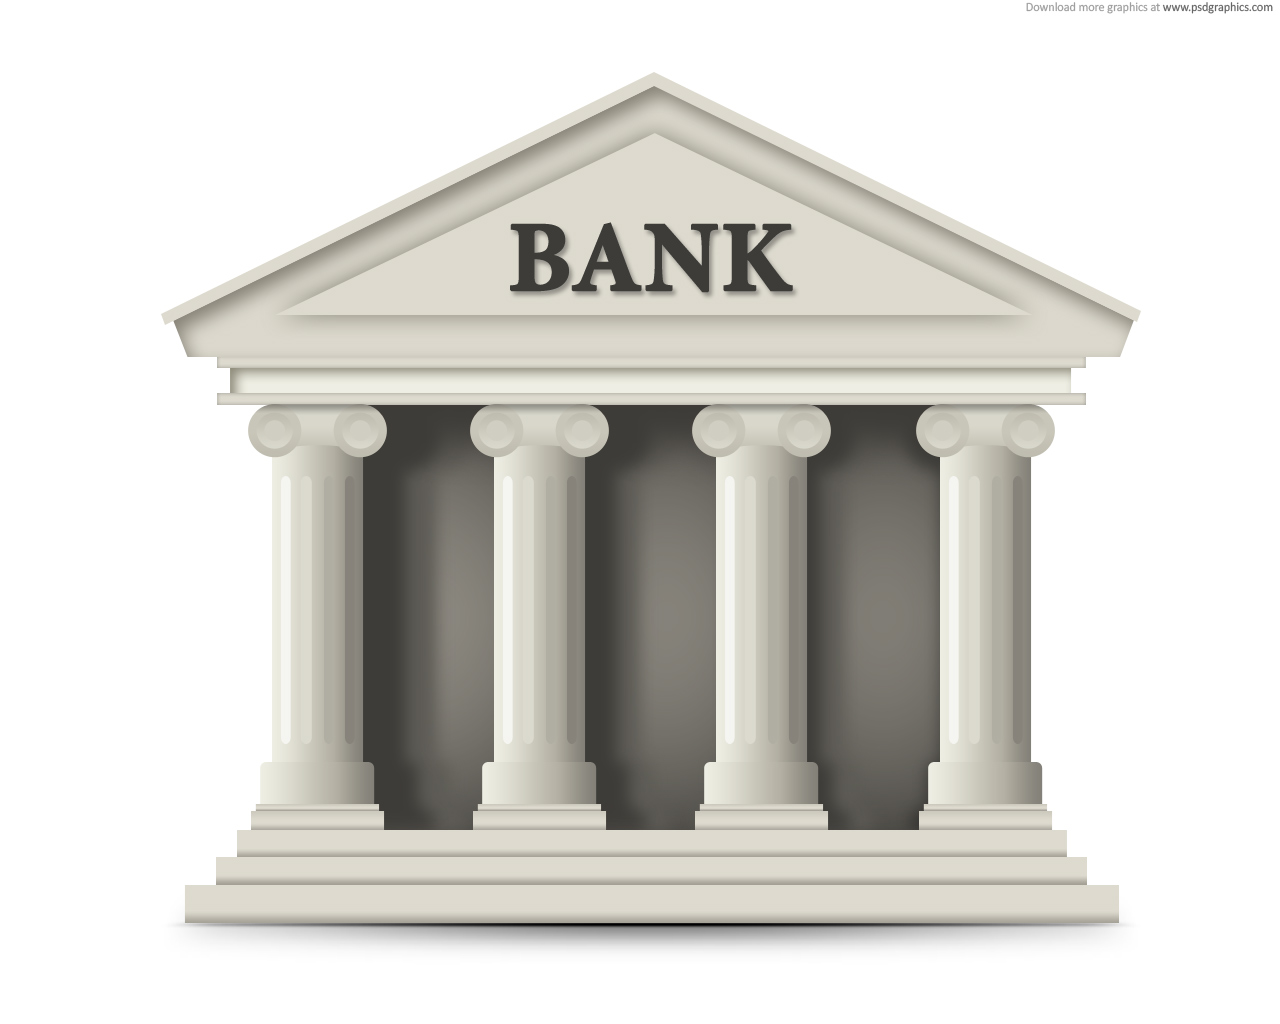  : Which way to the bank that accepts a deposit of market share